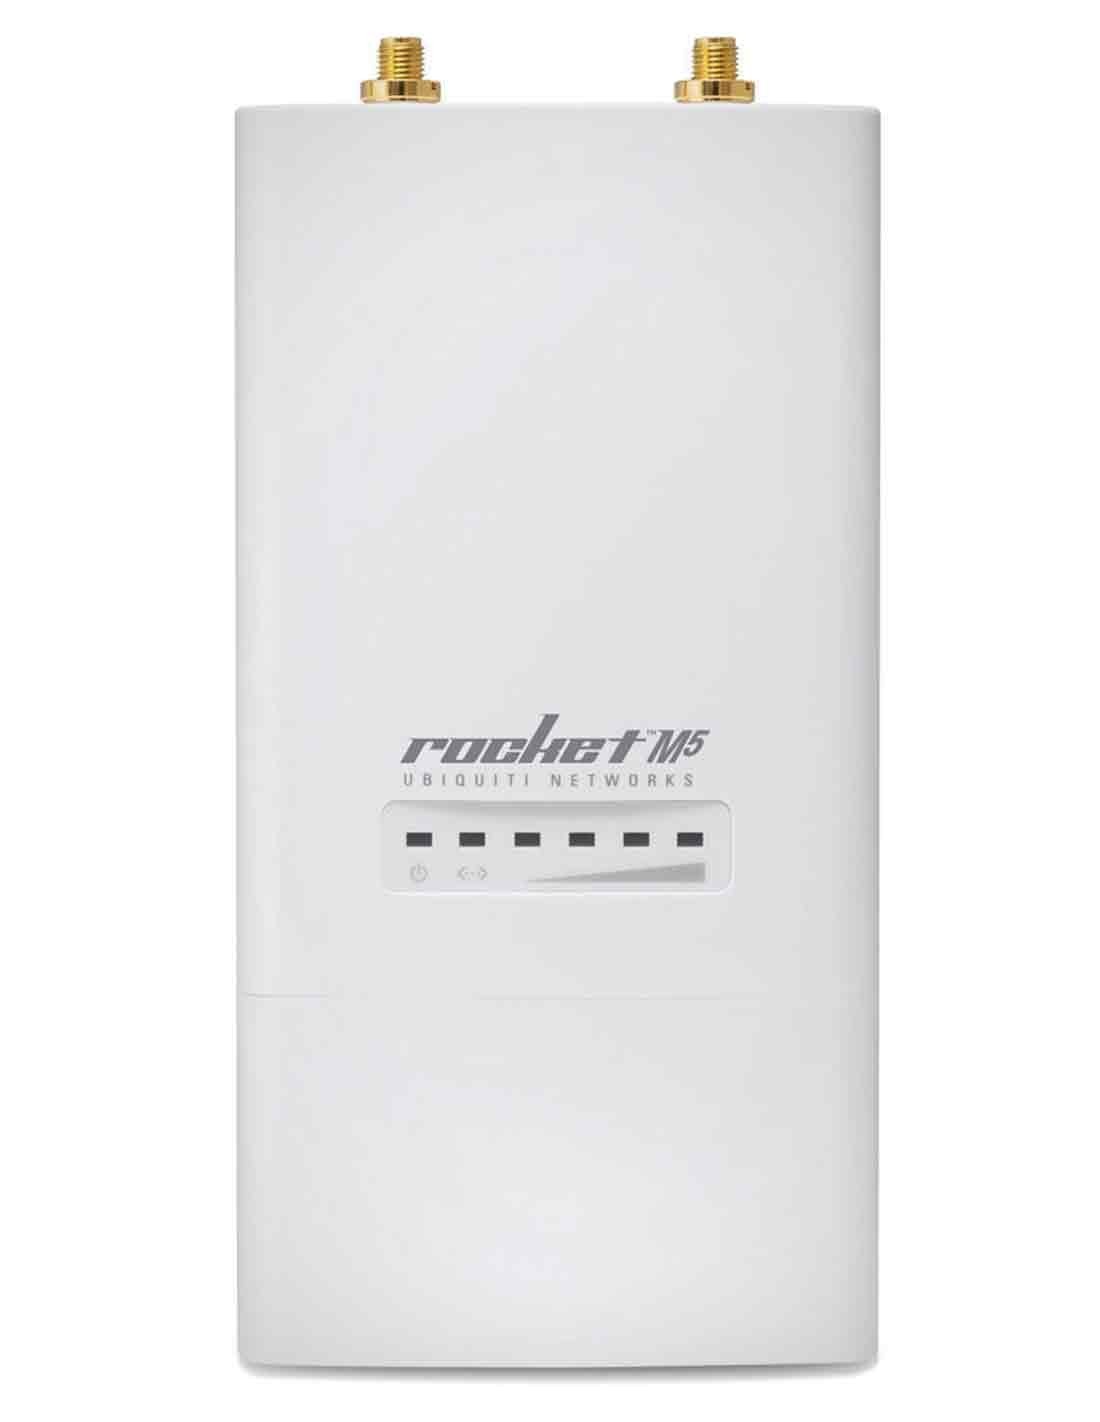 Ubiquiti Rocket M5 MIMO RocketM5 at a Cheap Price in Dubai Online Store